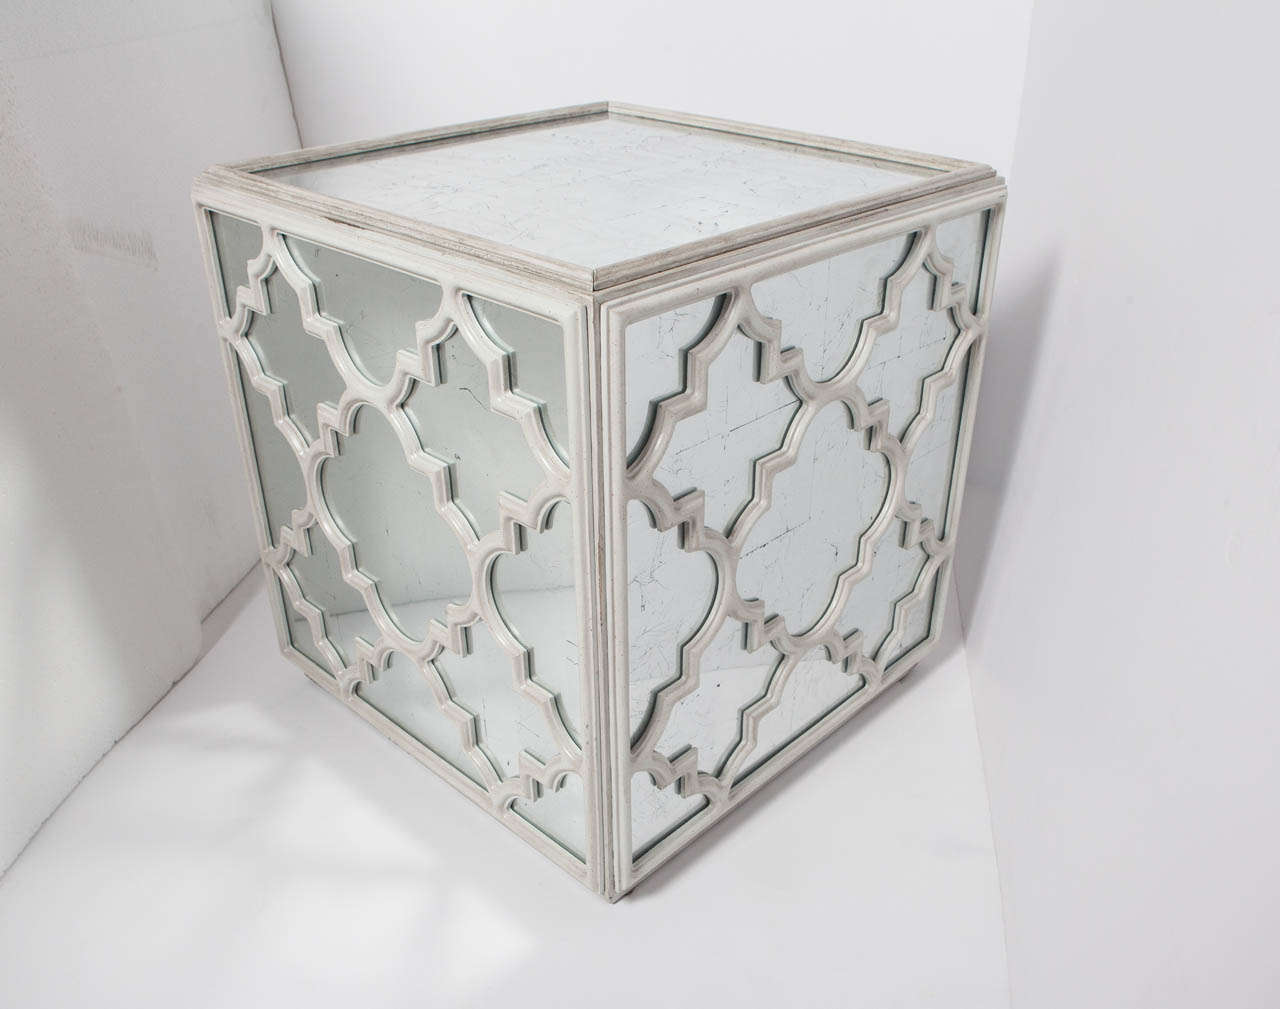 Distressed mirror and wood fretwork cube can be used as occasional, coffee or end table. Mirror is on top and four sides of cube.